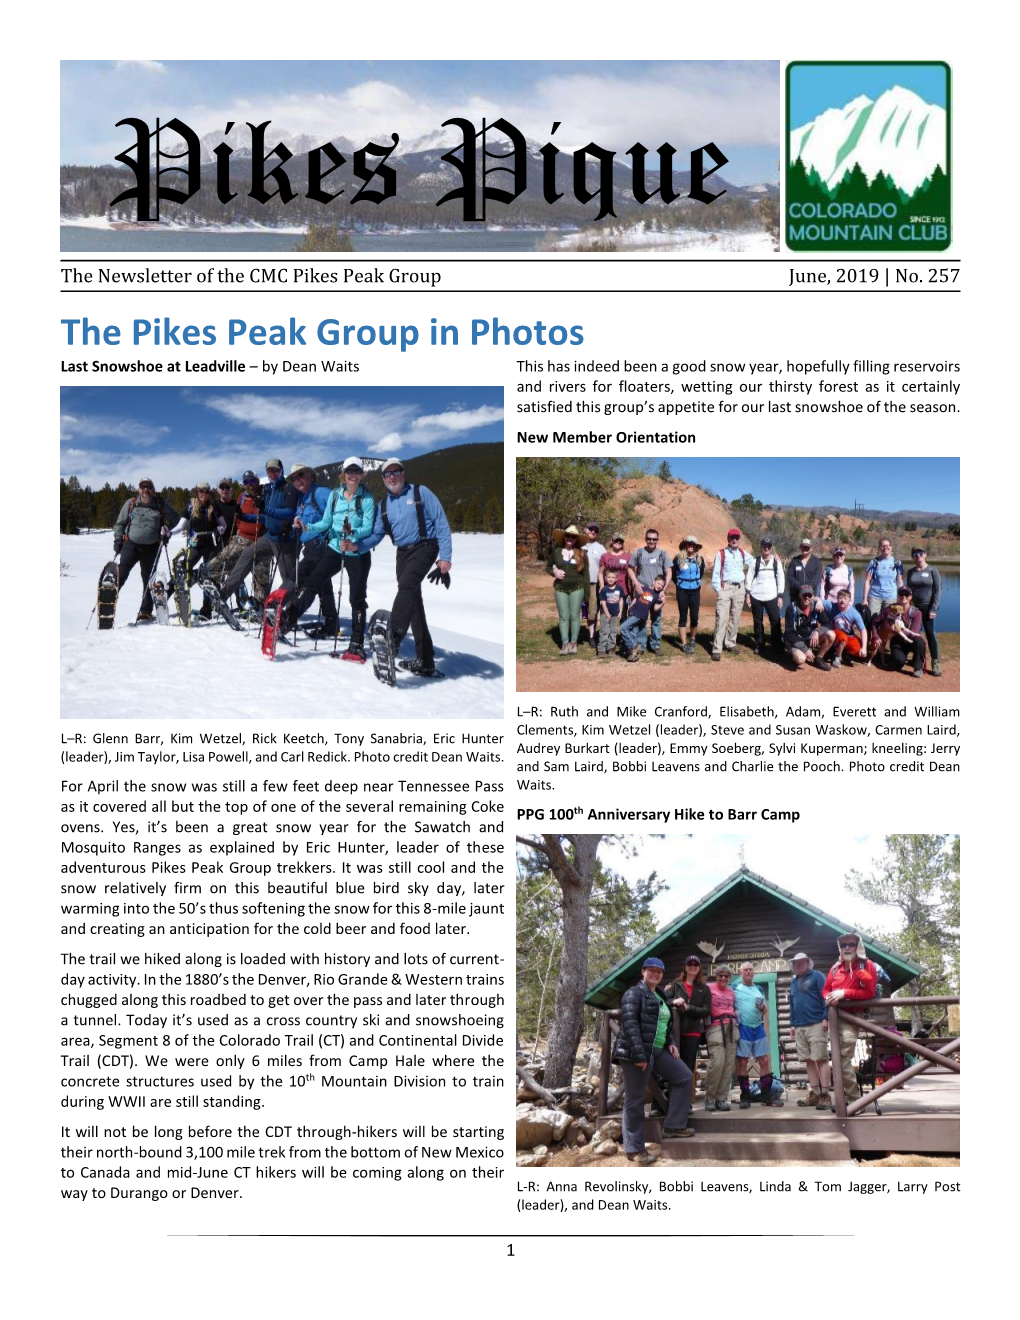 The Pikes Peak Group in Photos